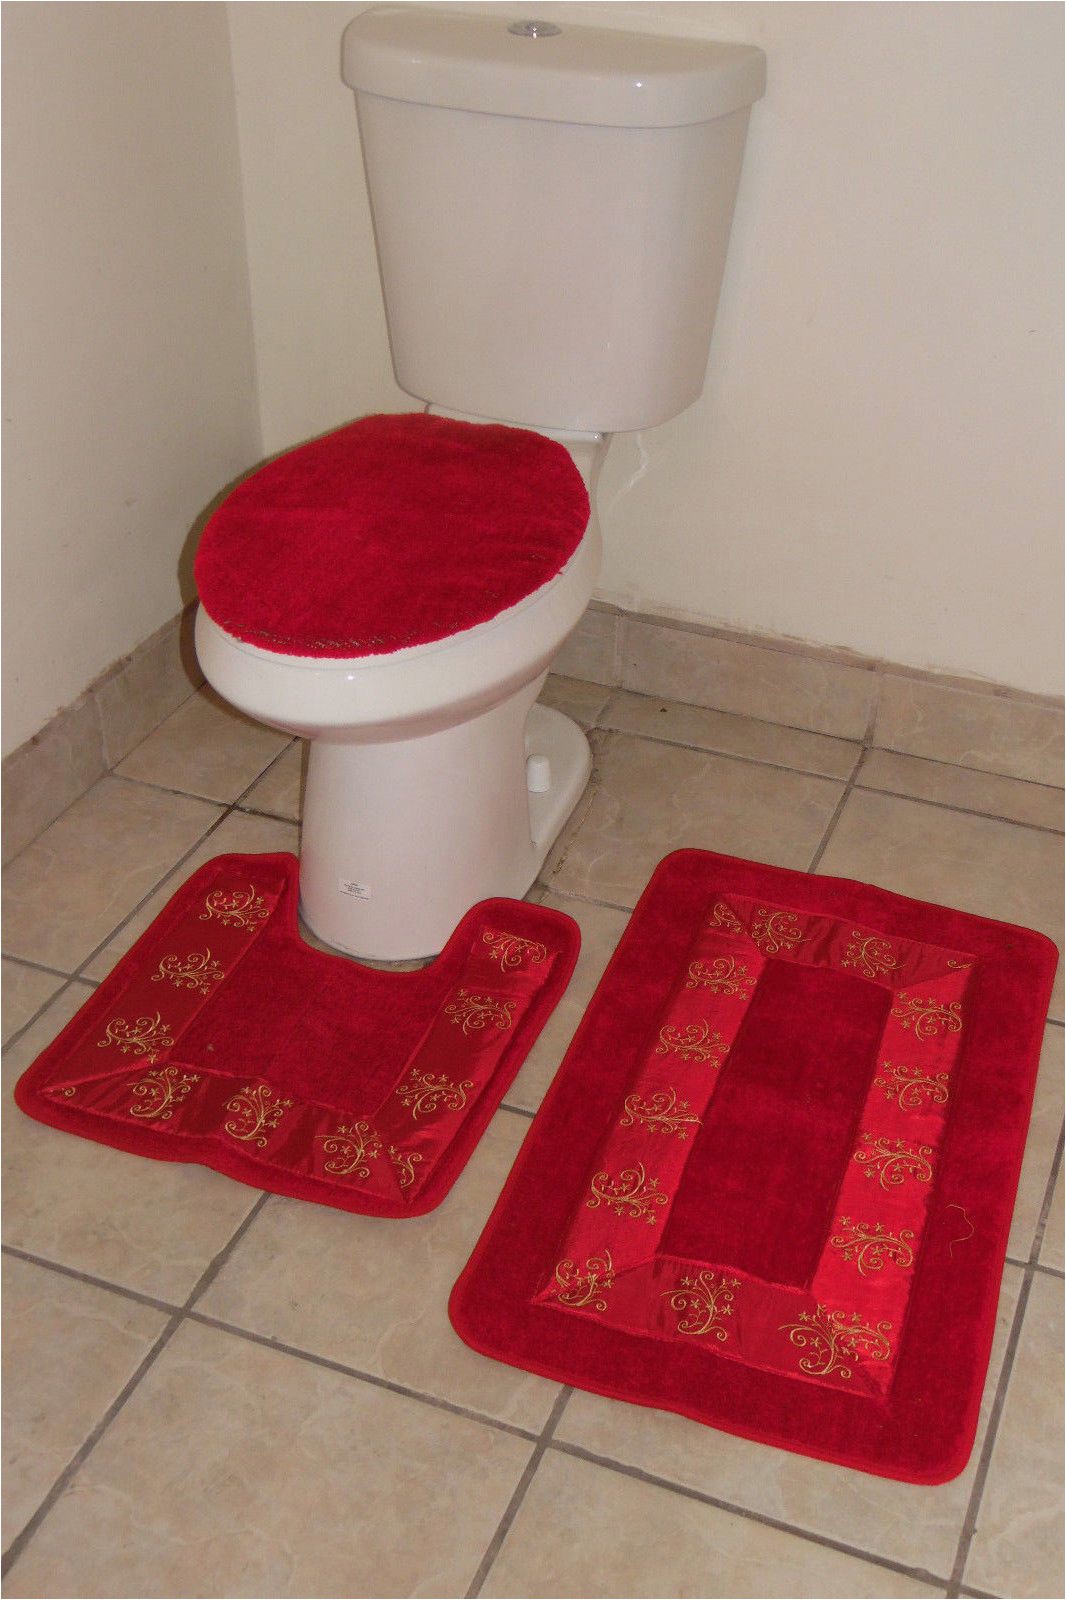 Bath Rugs and toilet Seat Covers Bathmats Rugs and toilet Covers 3pc 5 Red Bathroom